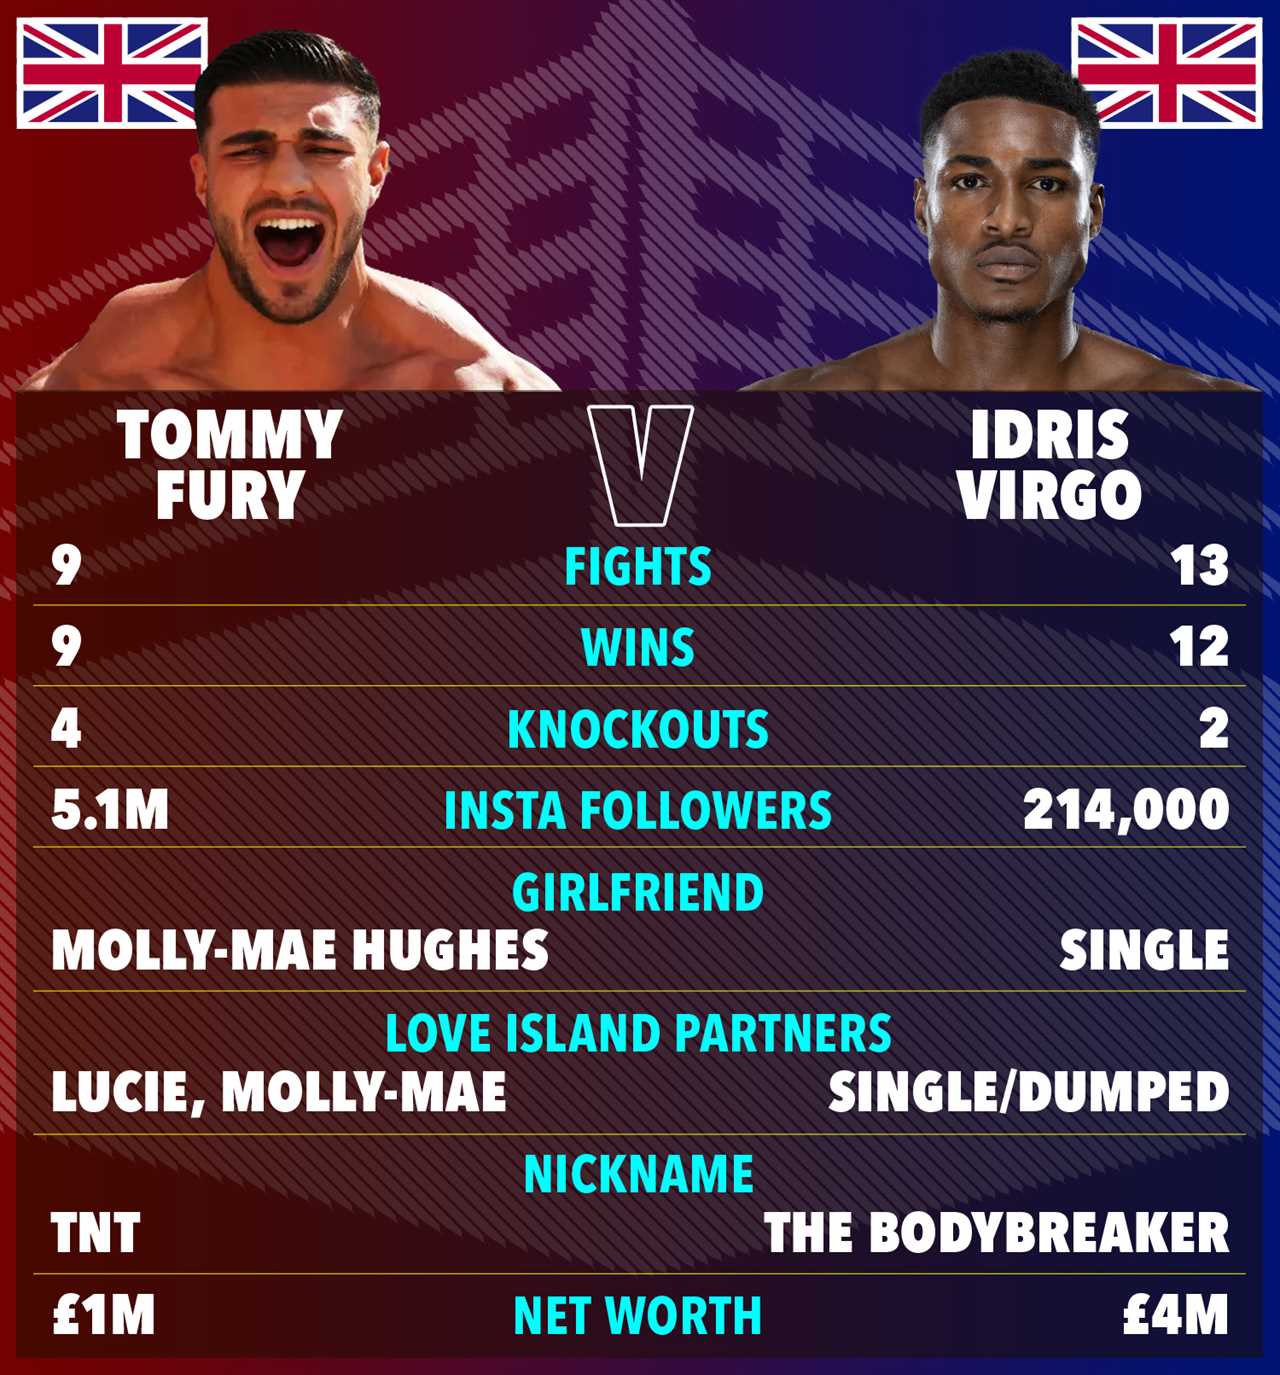 The Love Island stars compare Tommy Fury and Idris Virgo after a huge fight at KSI